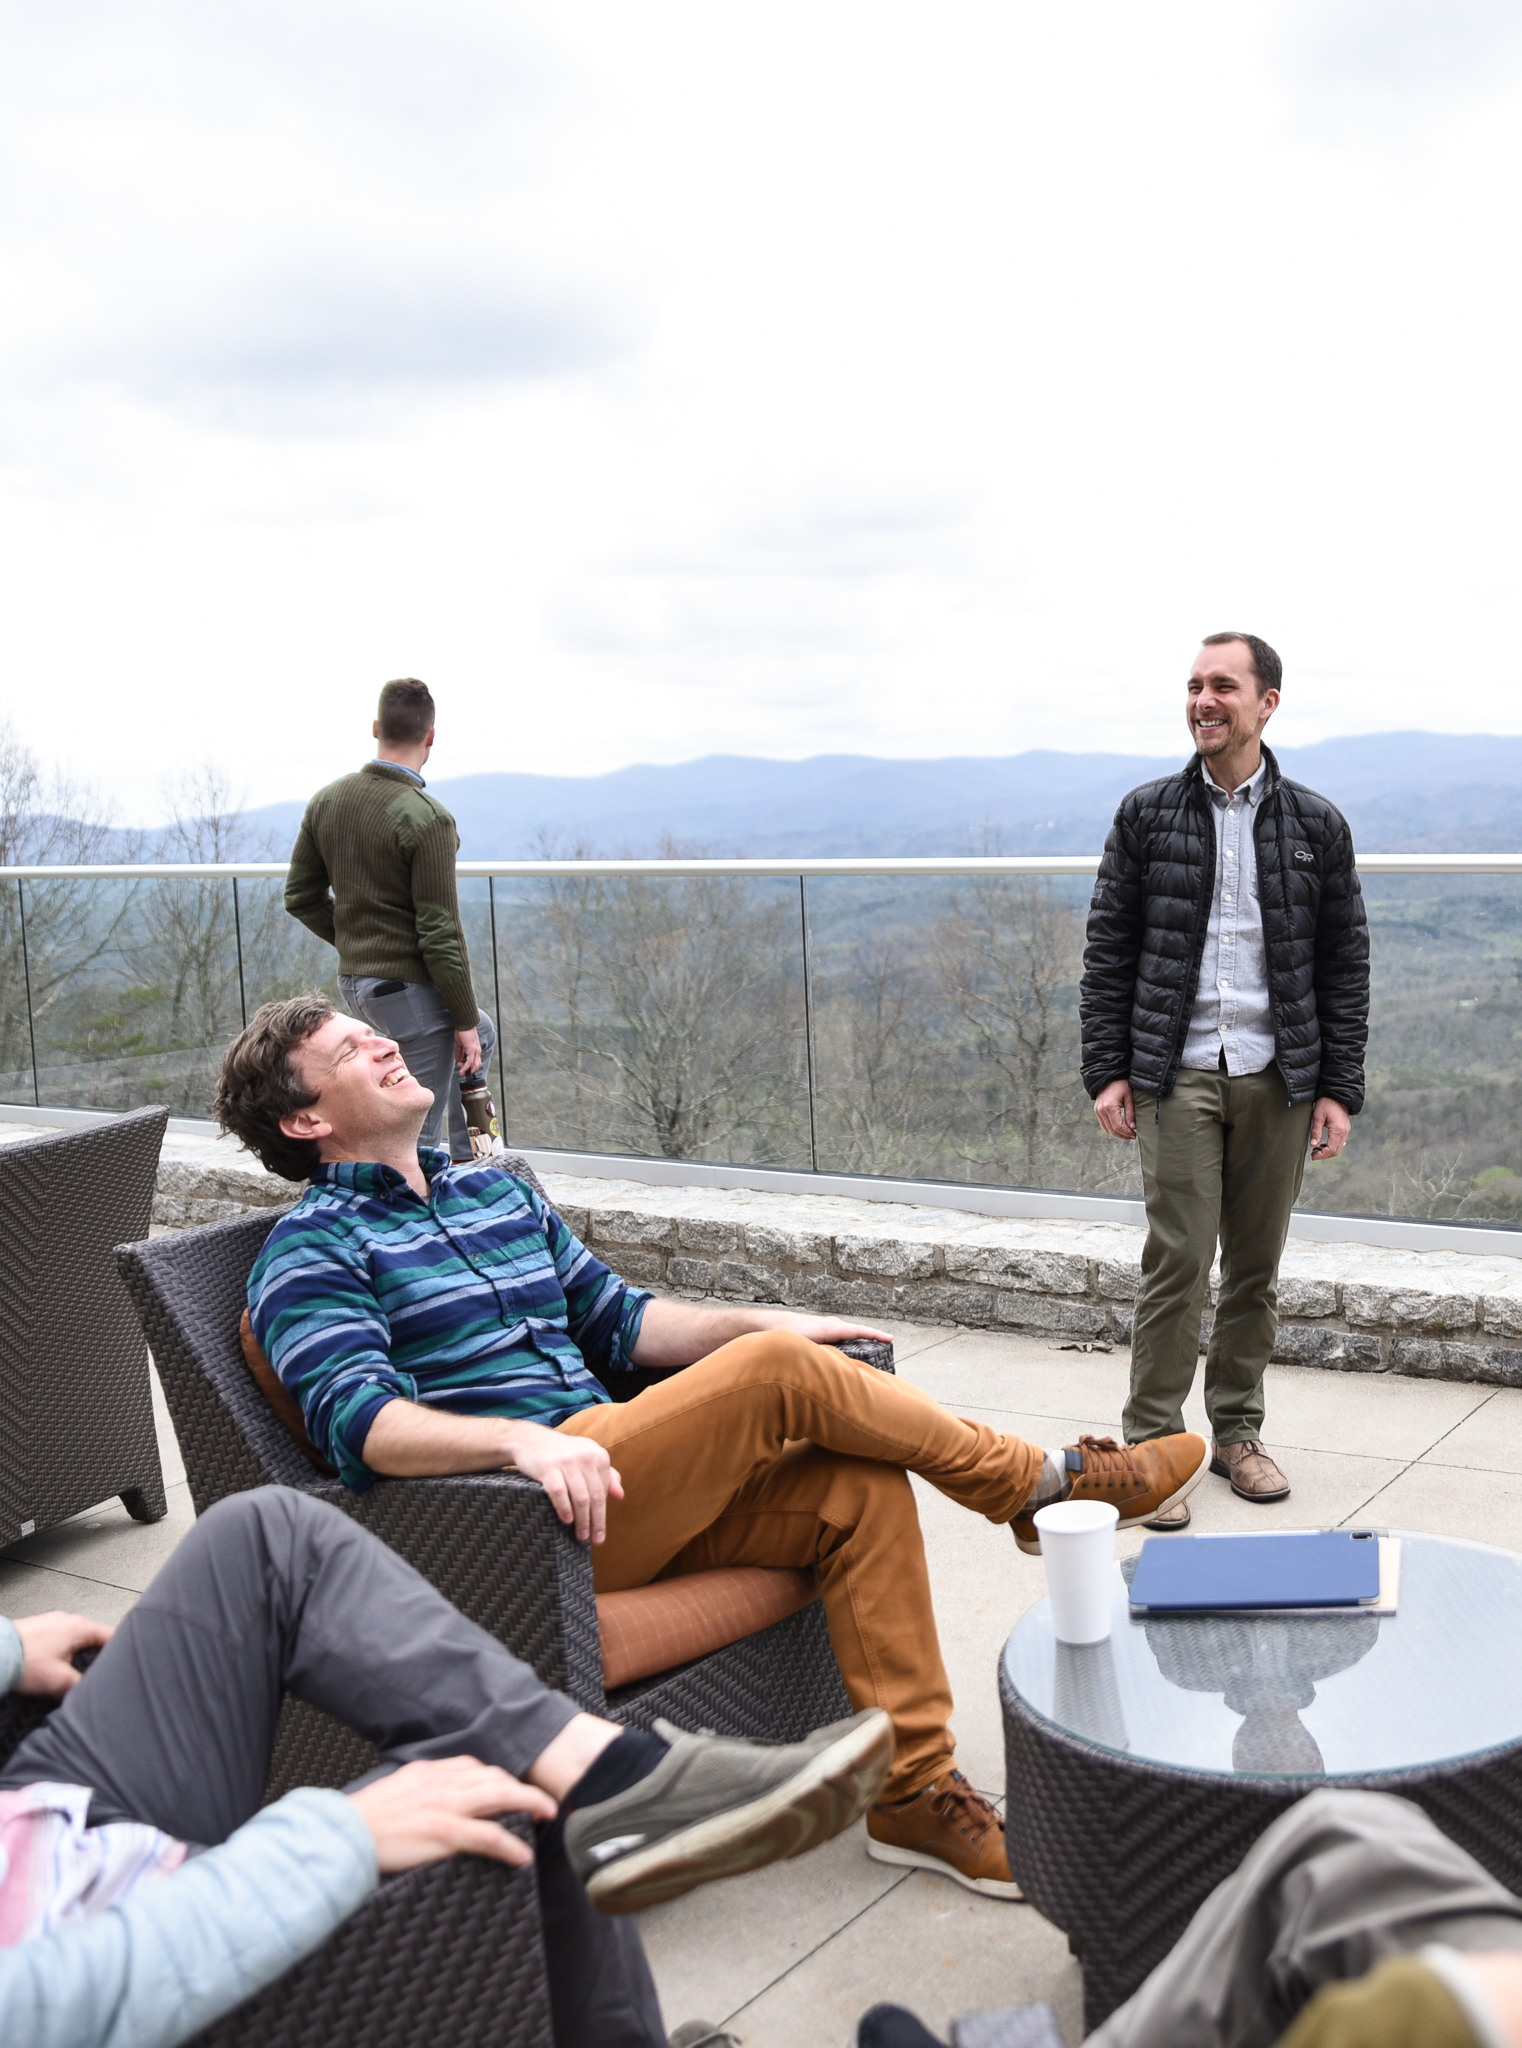 Two men talk to each other on a patio overlooking the mountains. The one on the left is wearing a blue striped pull over and rusty orange pants. His head is thrown back, laughing.